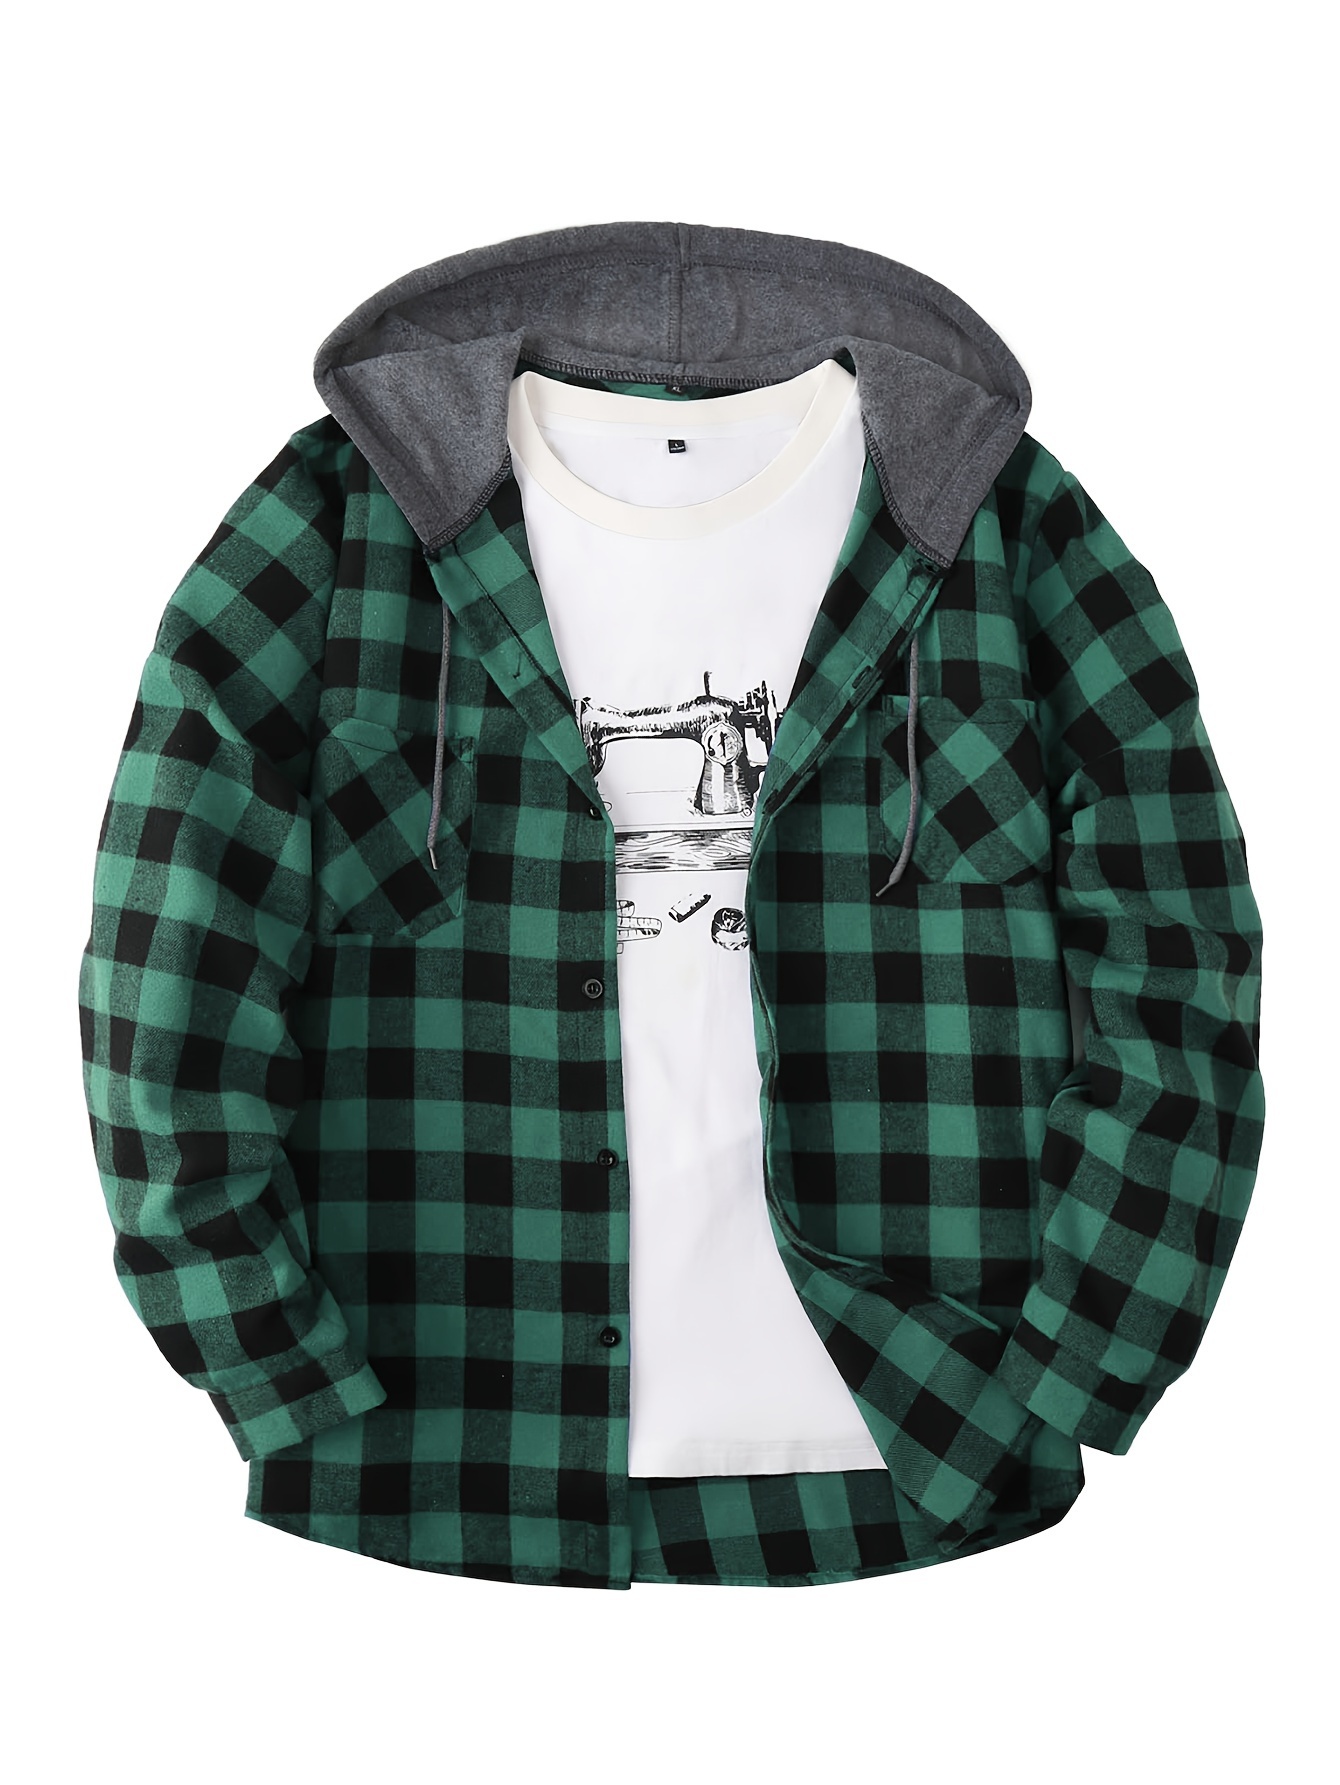 long sleeve casual regular fit button up hooded shirts jacket plaid shirt coat for men details 20